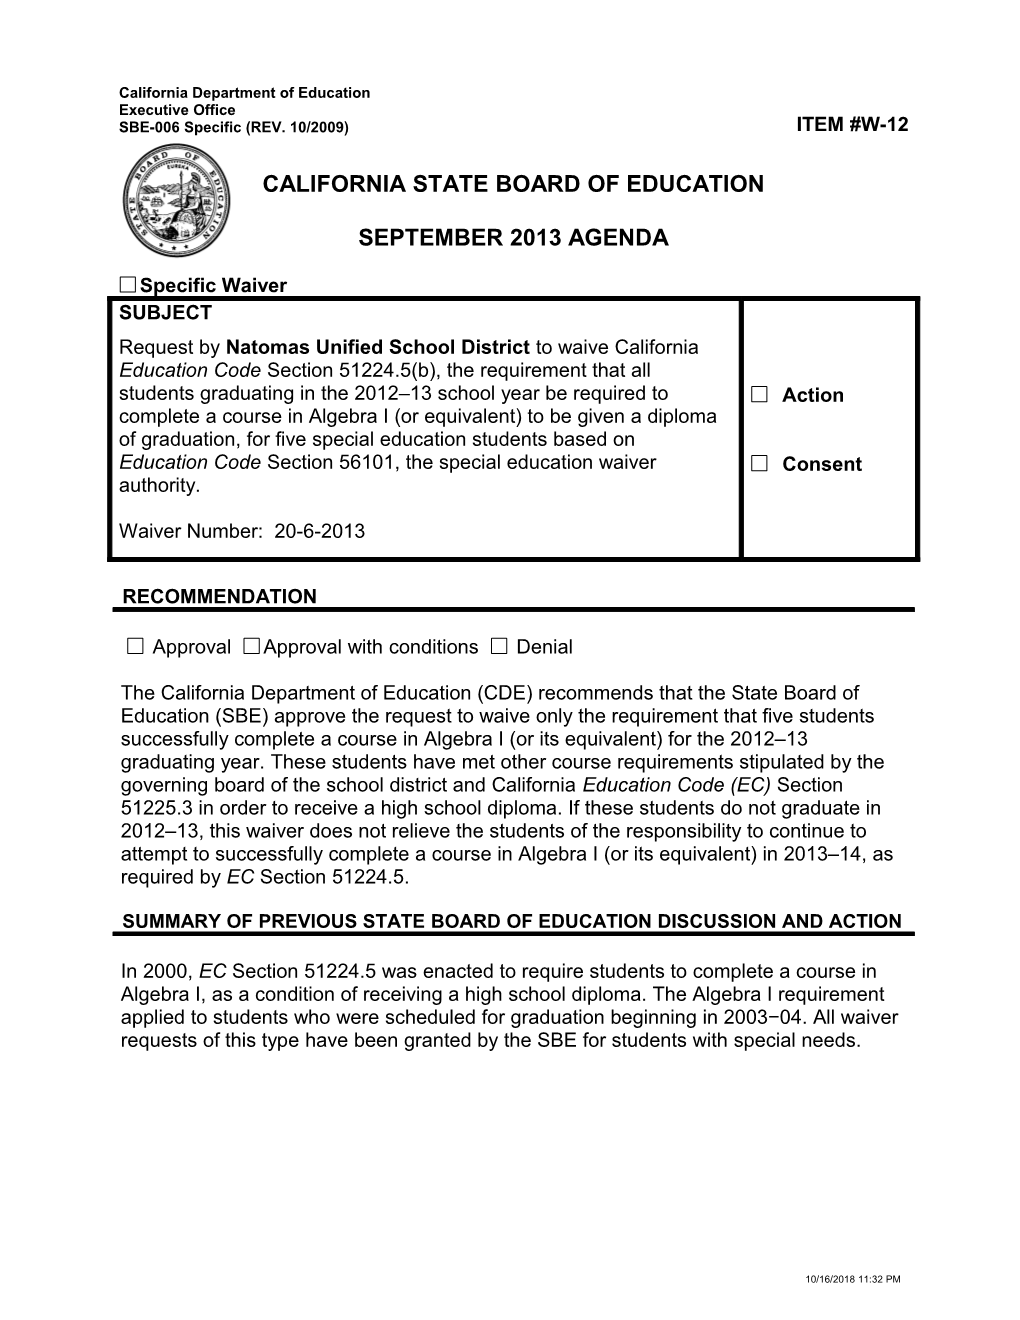 September 2013 Waiver Item W12 - Meeting Agendas (CA State Board of Education)